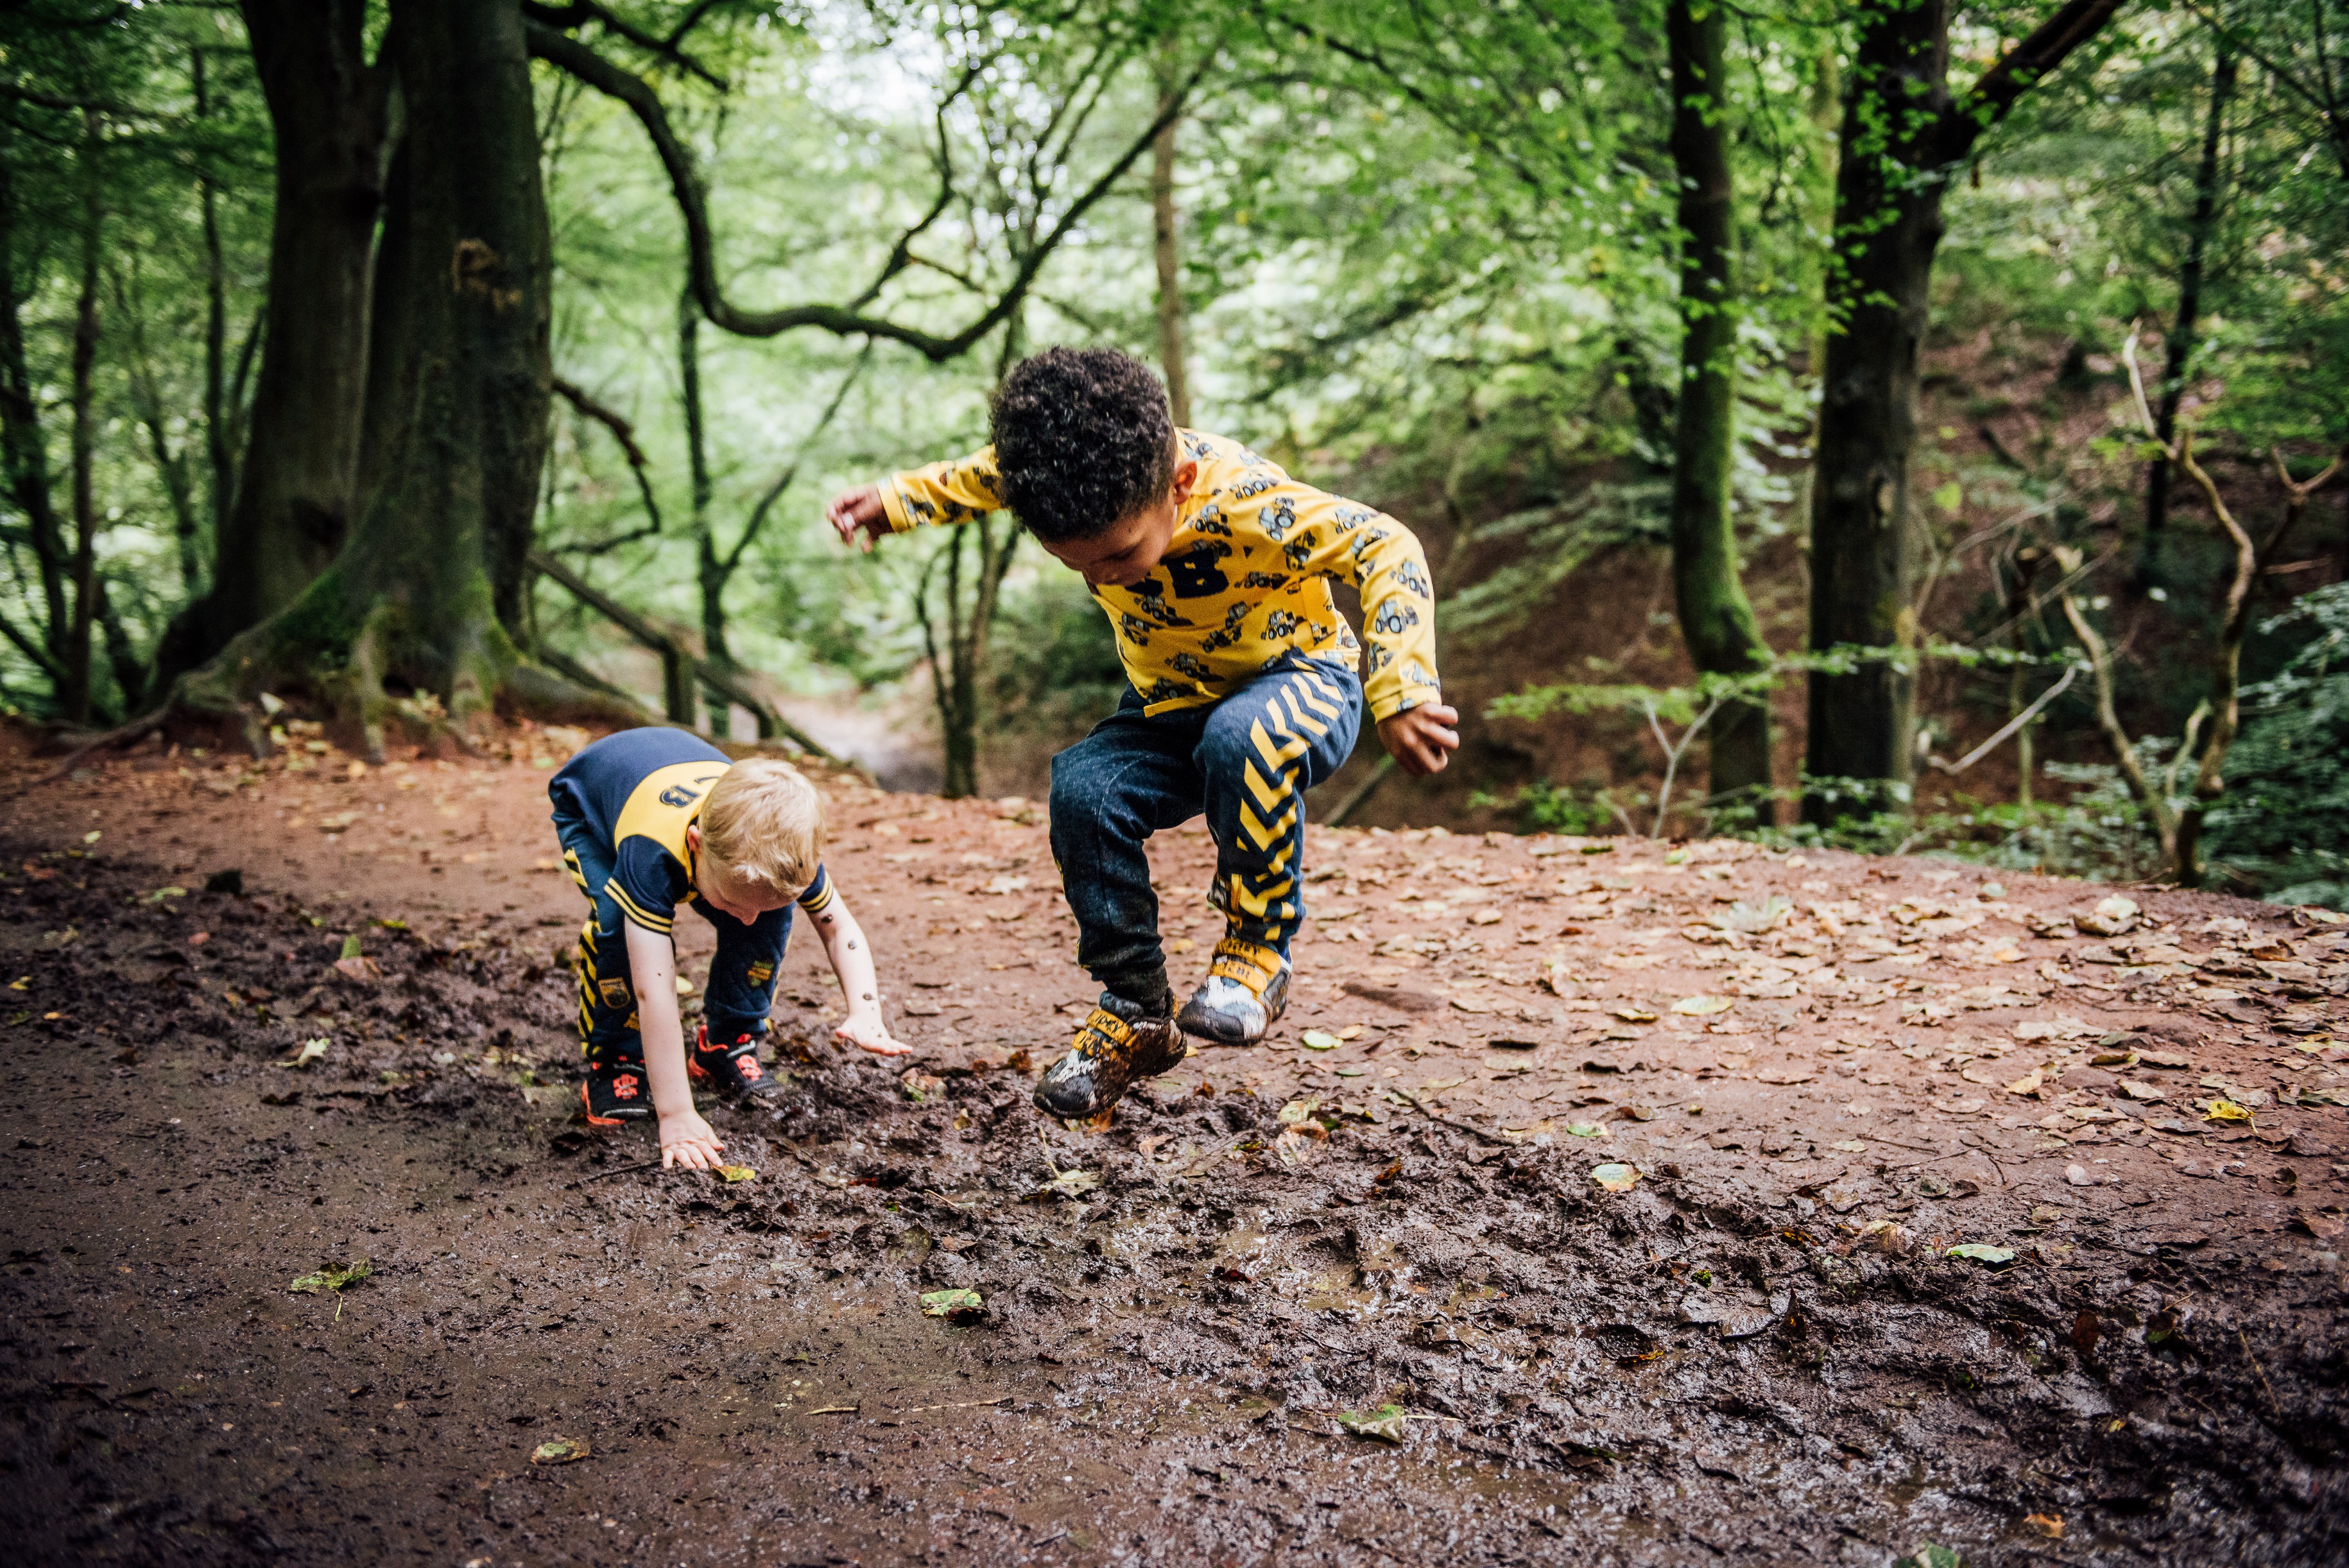 What Are The Benefits Of Playing With Mud?